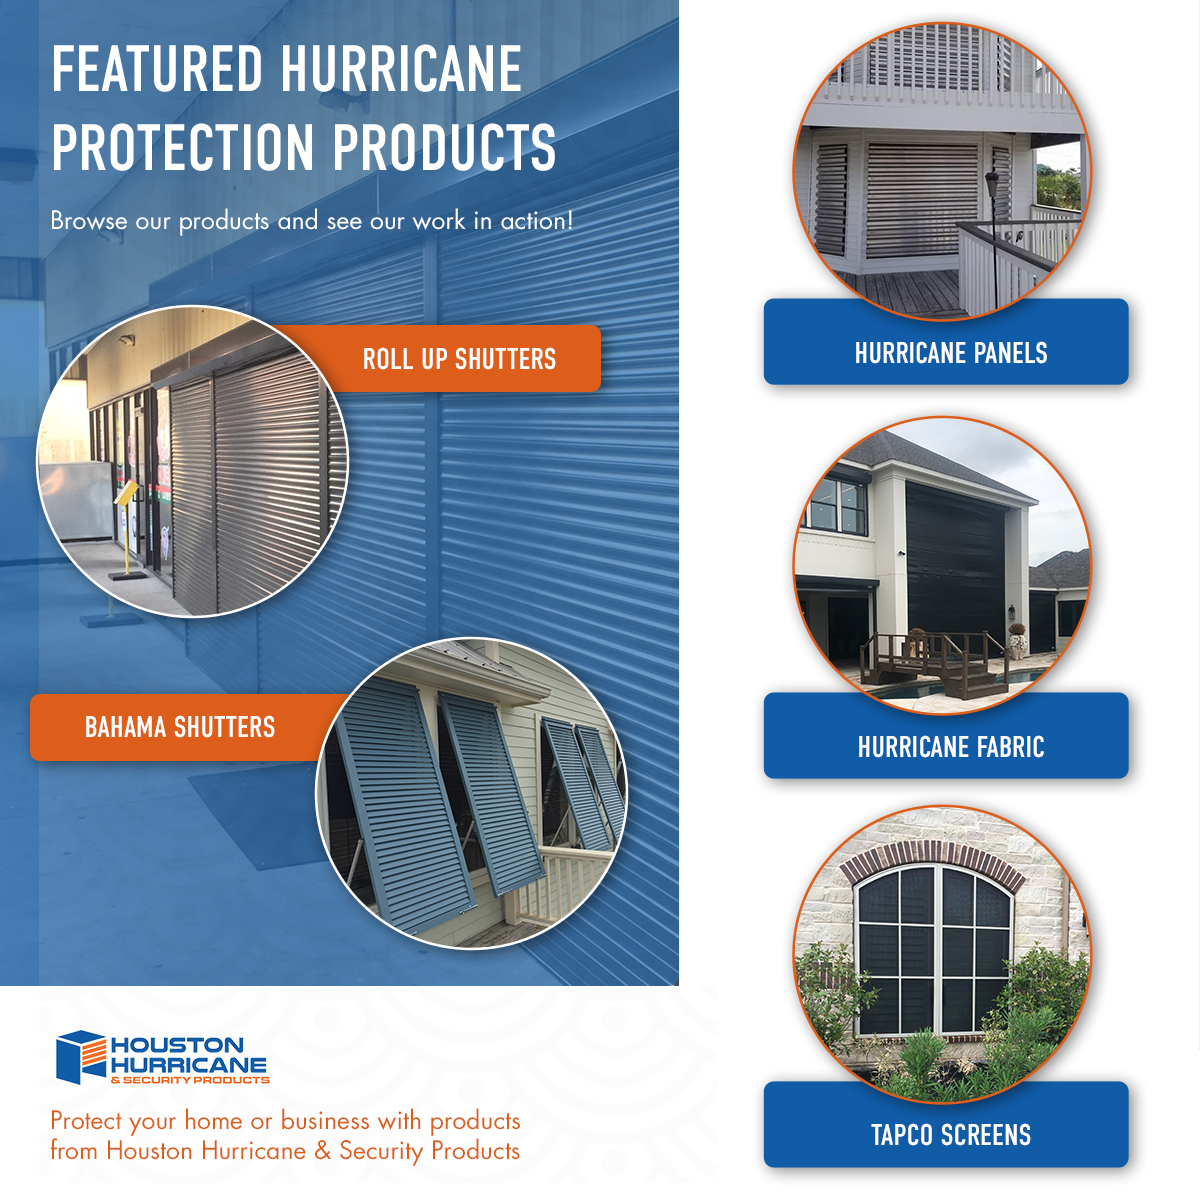 Featured Hurricane Protection Products